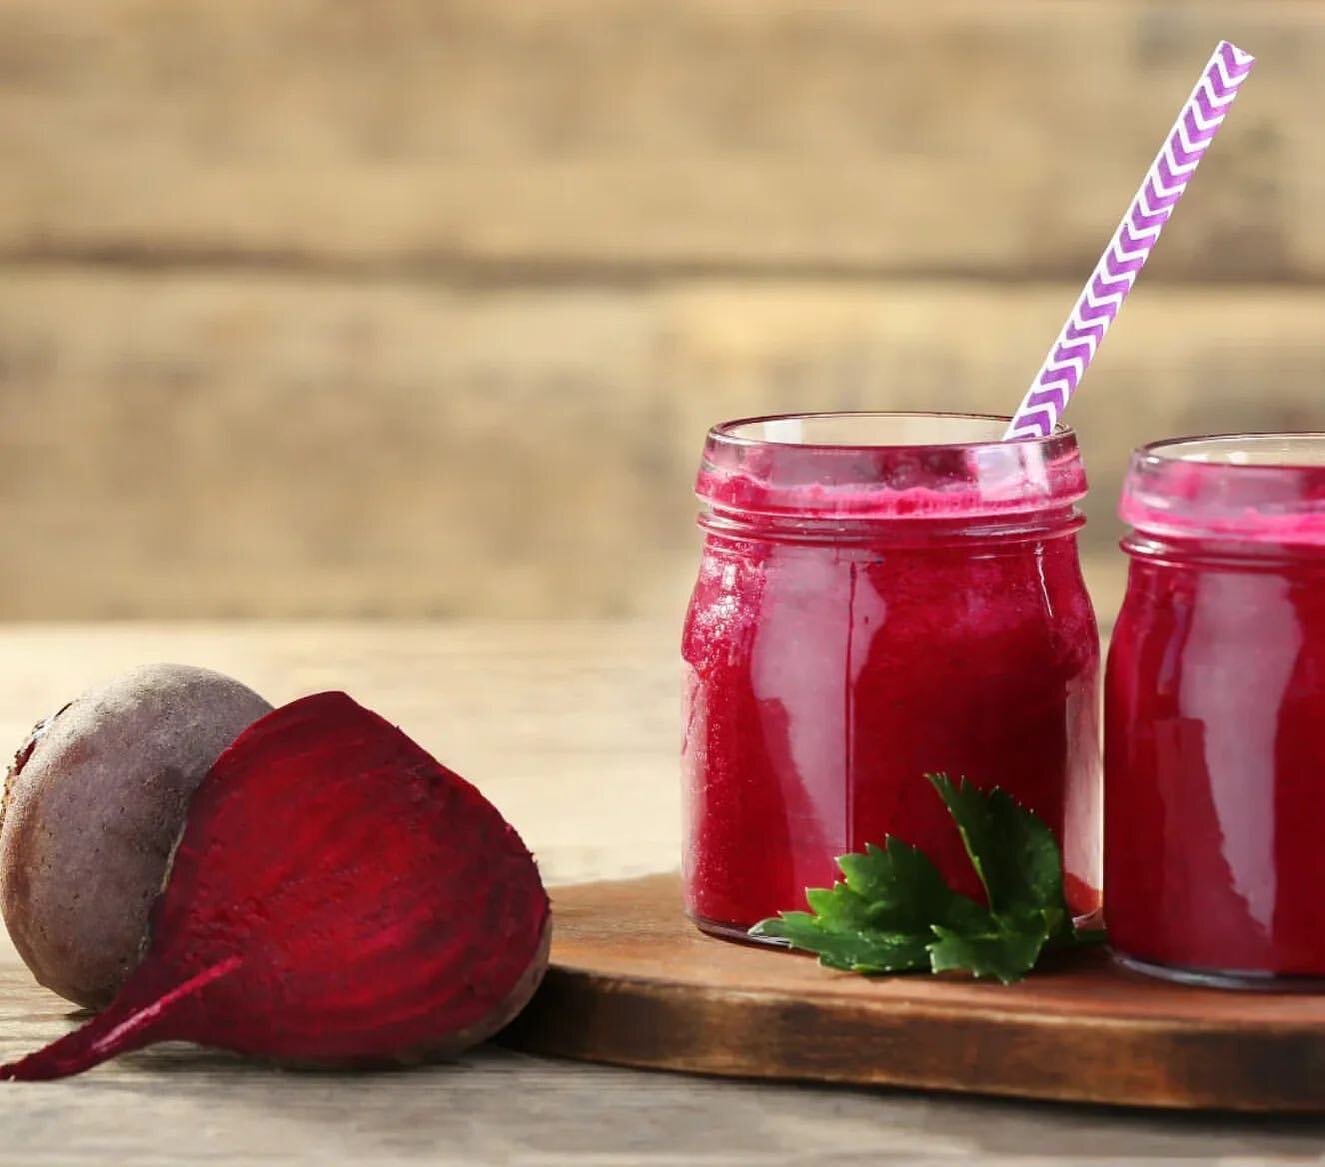 How delicious does this red beet juice look?!
Kuvings cold press juicers are able to squish hard root vegetables, such as beetroot, though some preparation is required to make sure excess pressure is not put on the machine. Cut the beet into smaller 